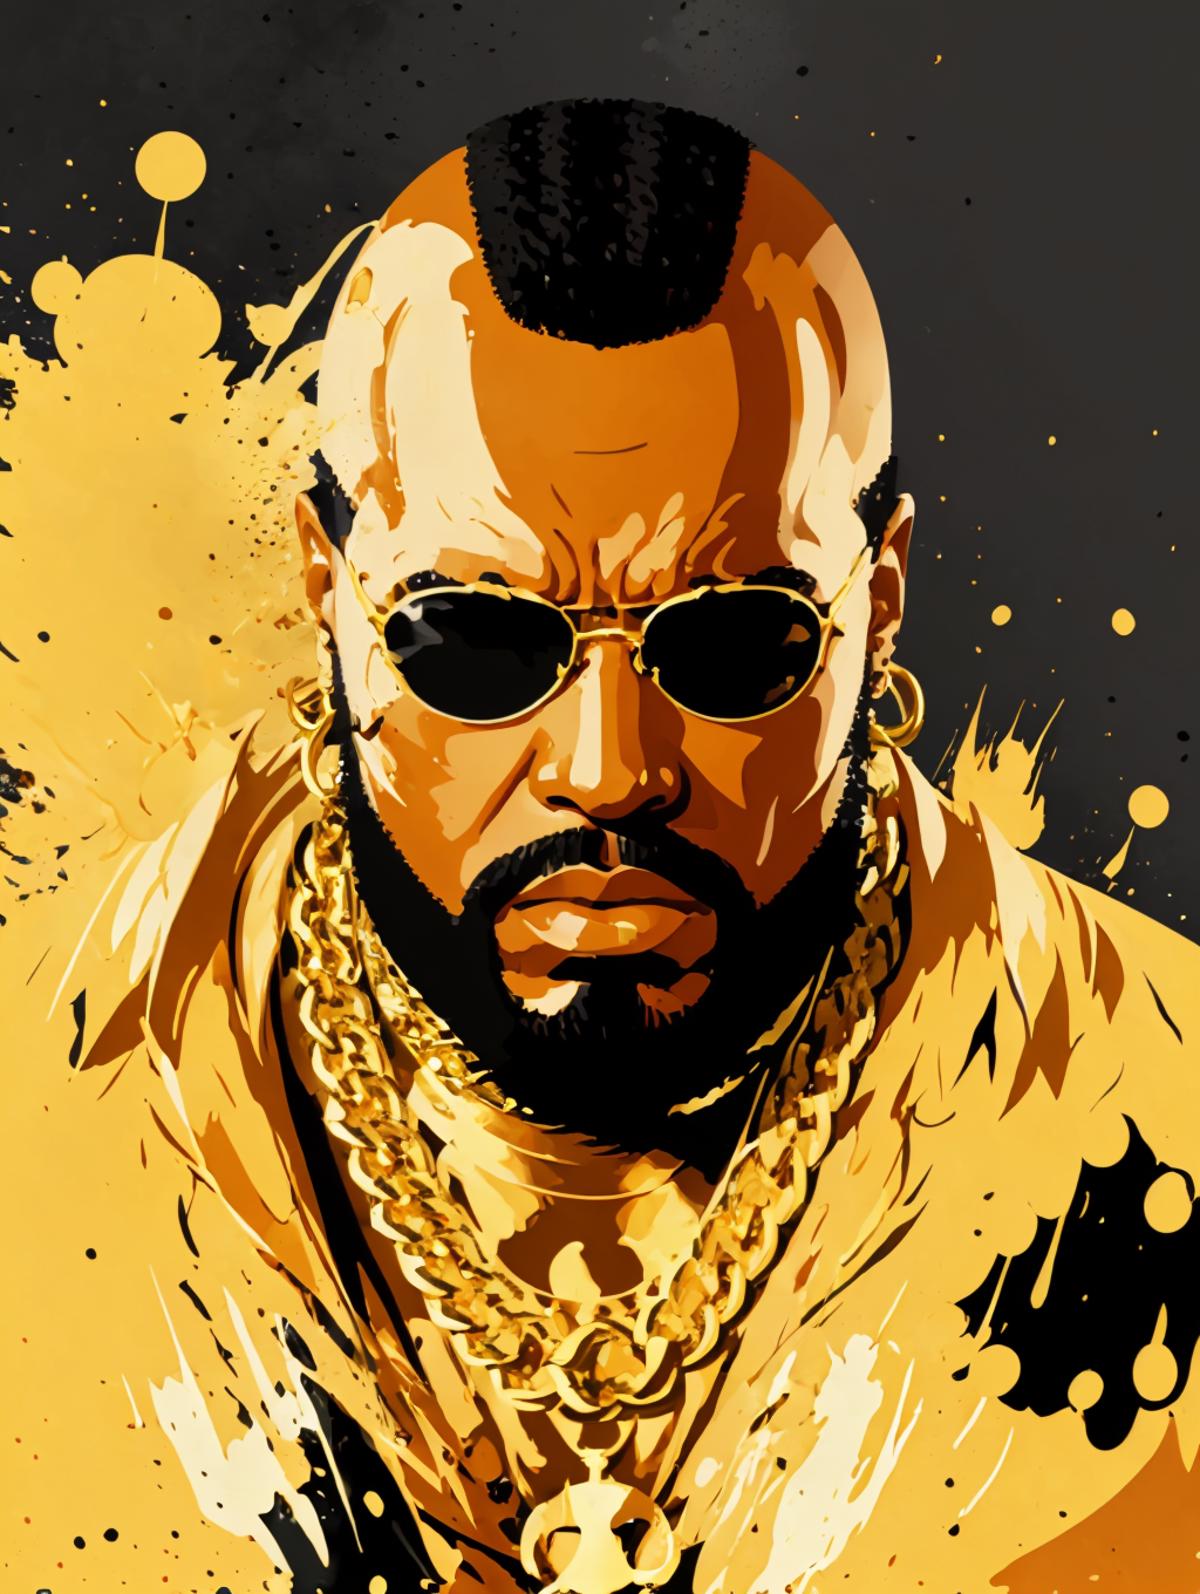 A black and gold portrait of a man with sunglasses and gold chains.